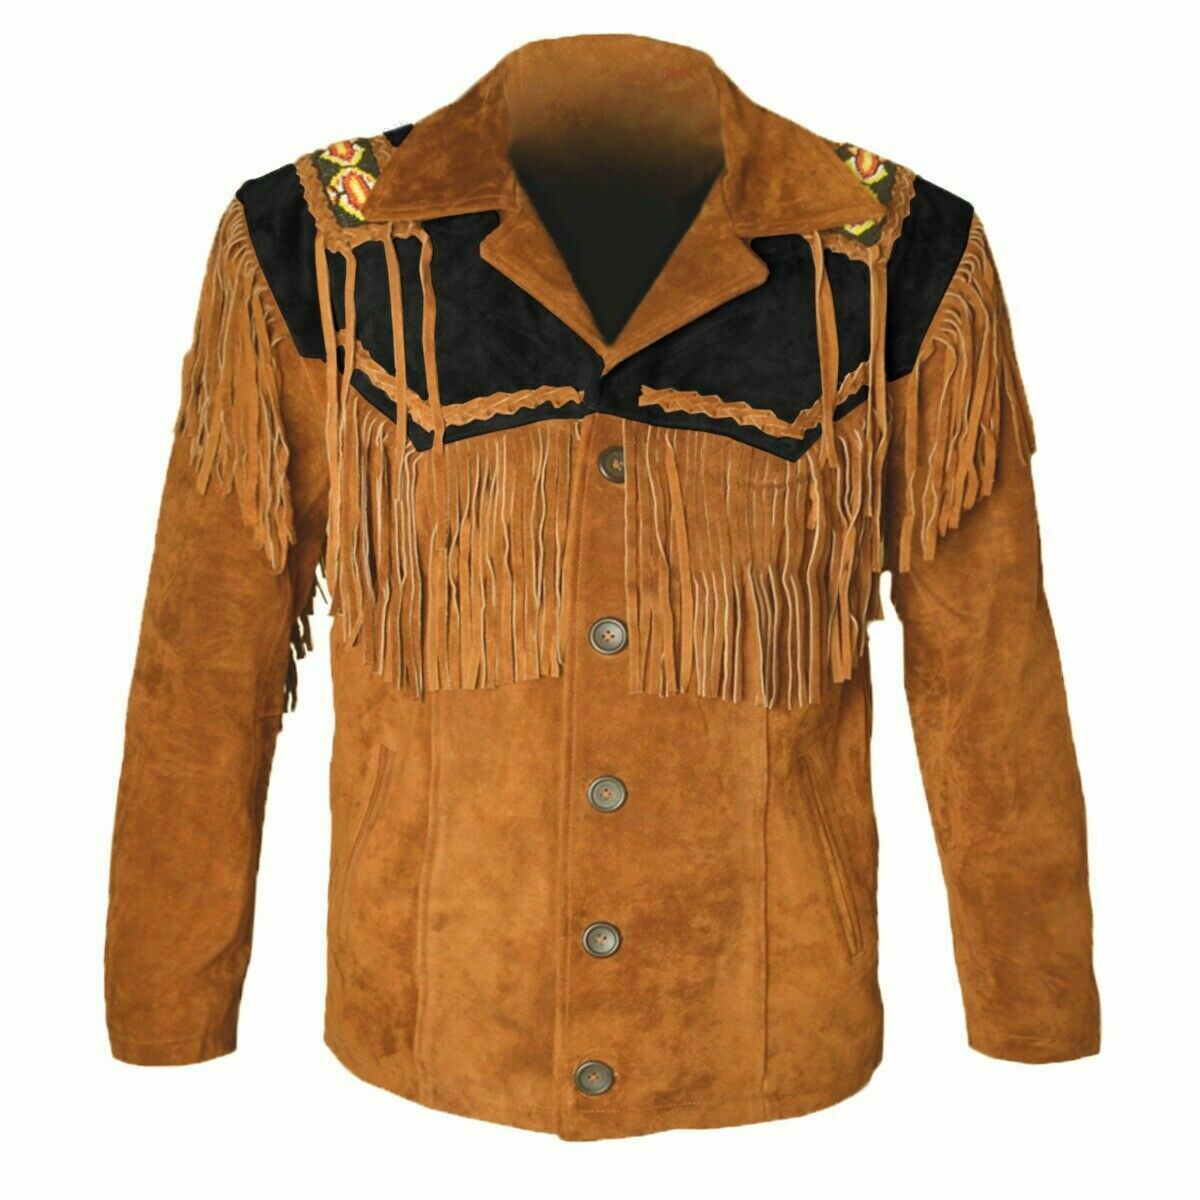 New Men's Suede Western Style Cowboy Leather Jacket With Fringe